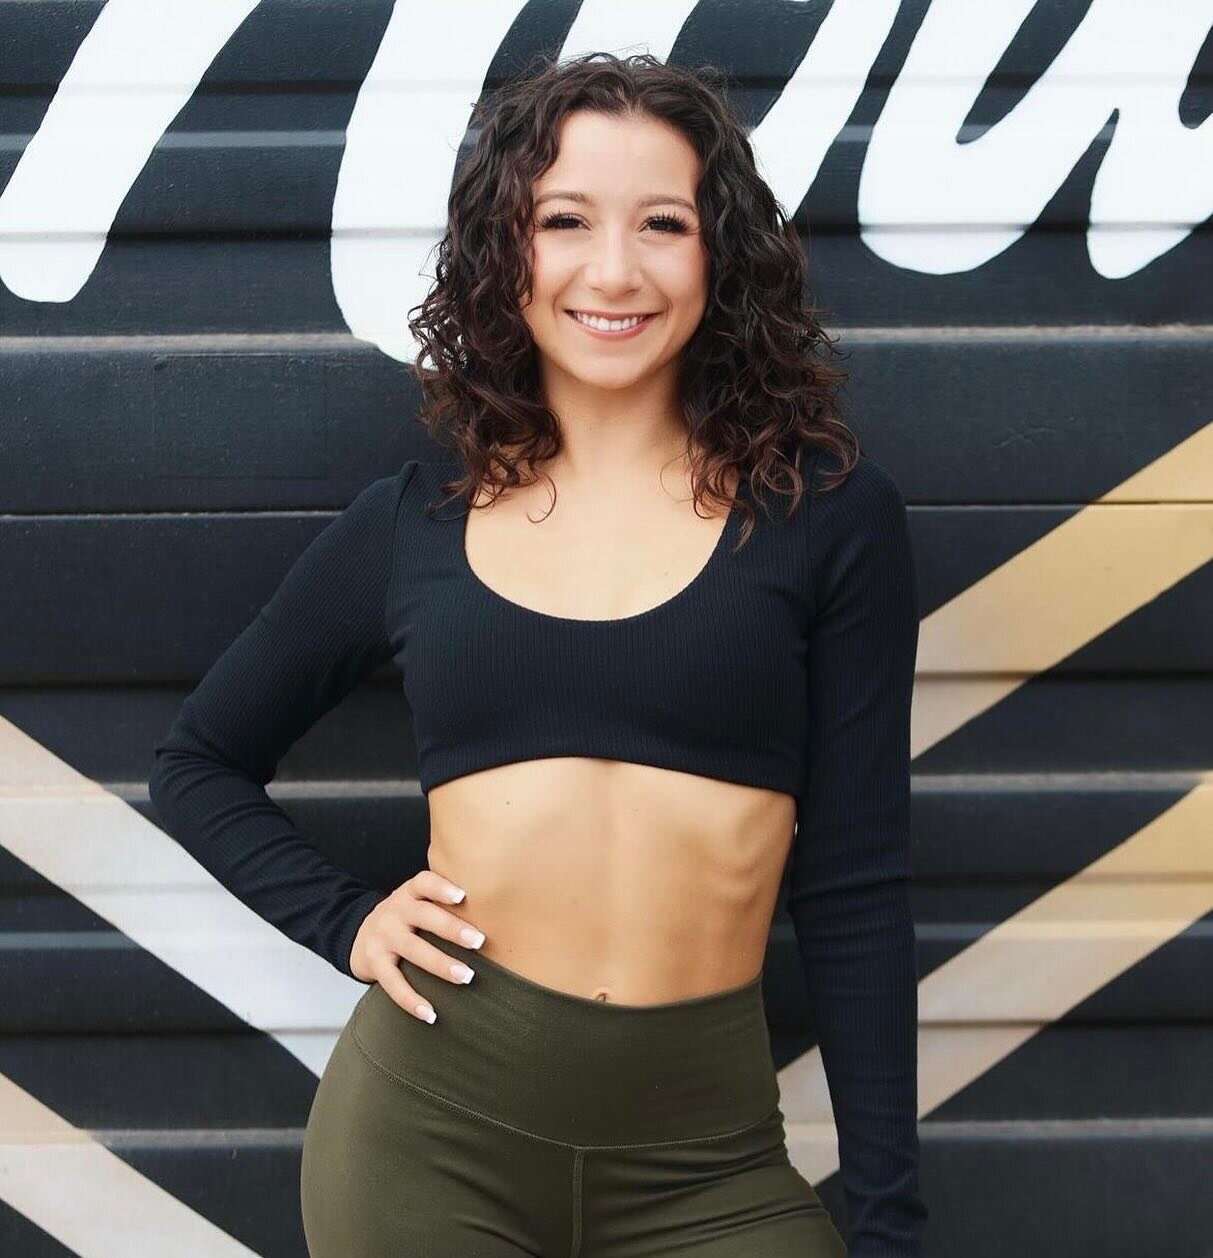 Meet Allie 👋 the newest member of the B21 Instructor Team. With a background in numerous fitness modalities and professional dance experience, we know she&rsquo;s going to &lsquo;WOW&rsquo; you ;) Come join her for FREE this Monday at 7:15AM 👏